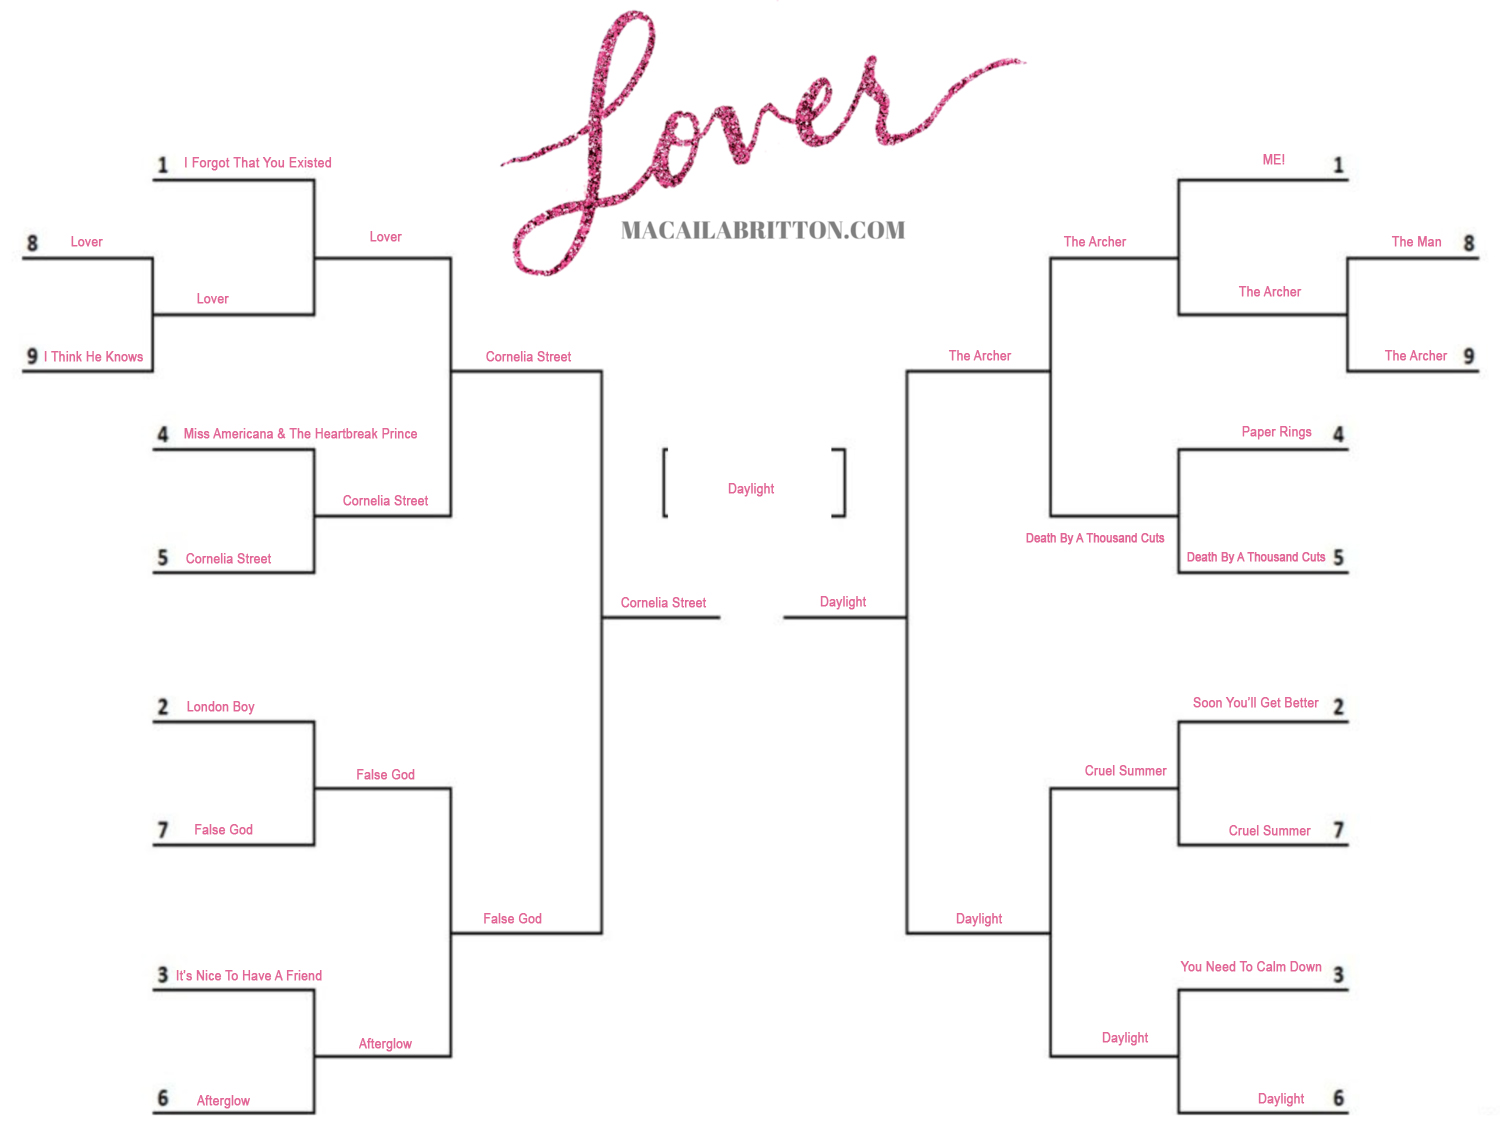 Taylor Swift Lover Album Favorite Songs and Tracklist